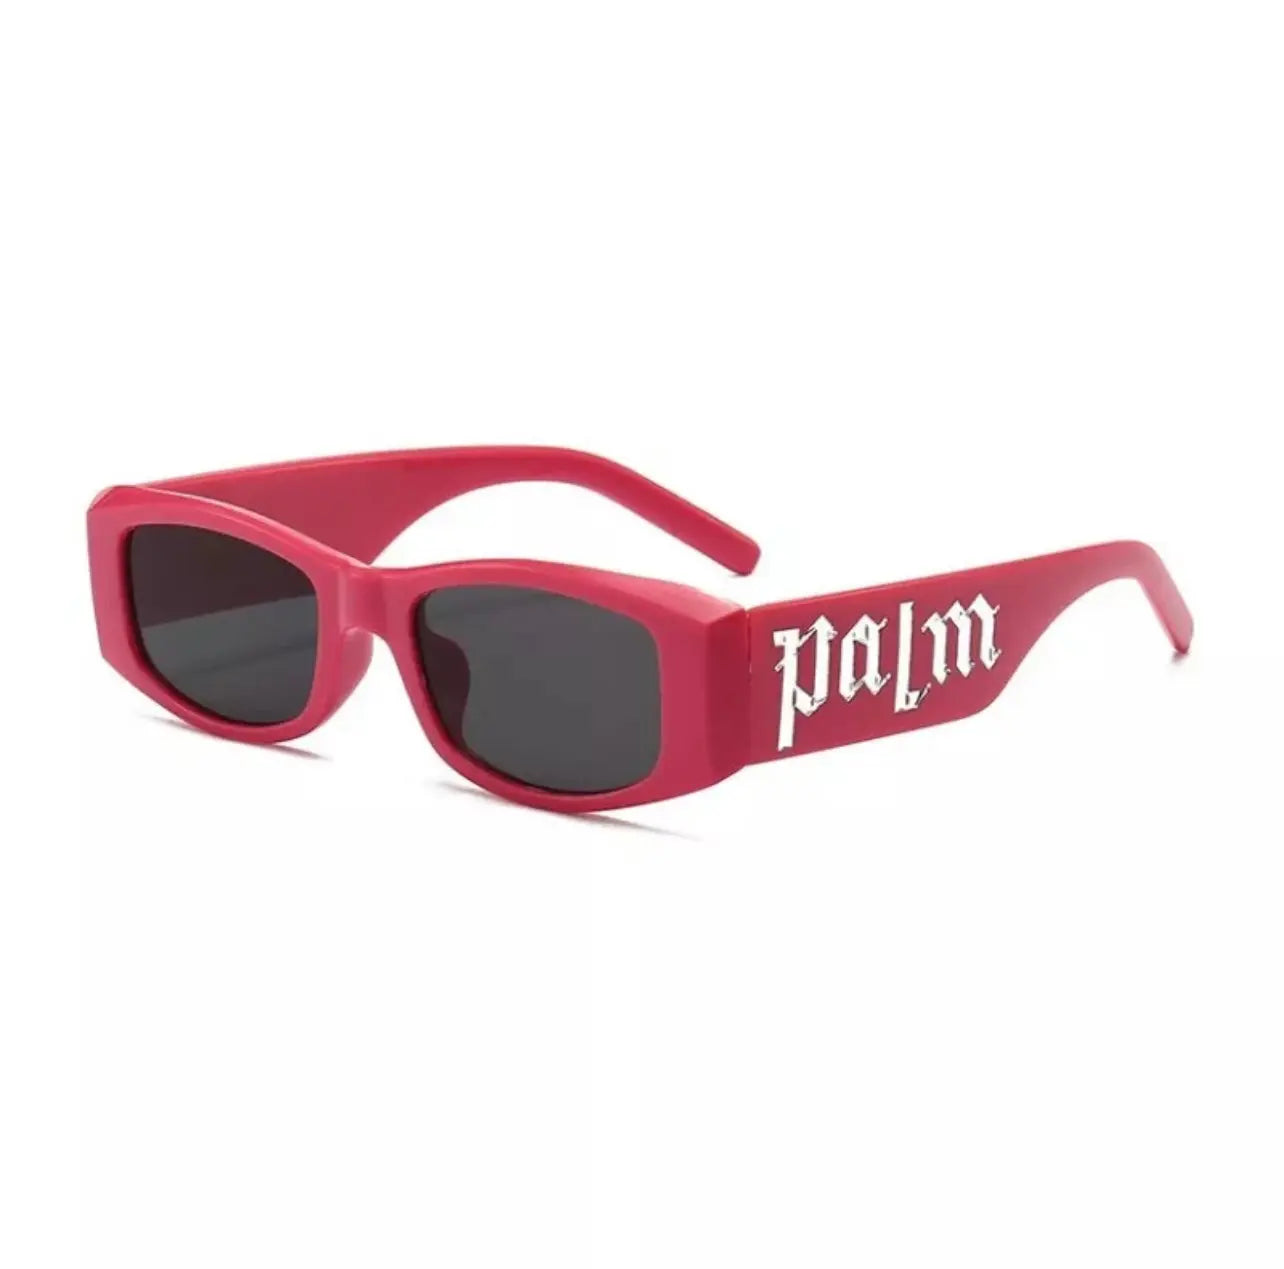 a pair of pink palm angels sunglasses with the word'palm'on them.